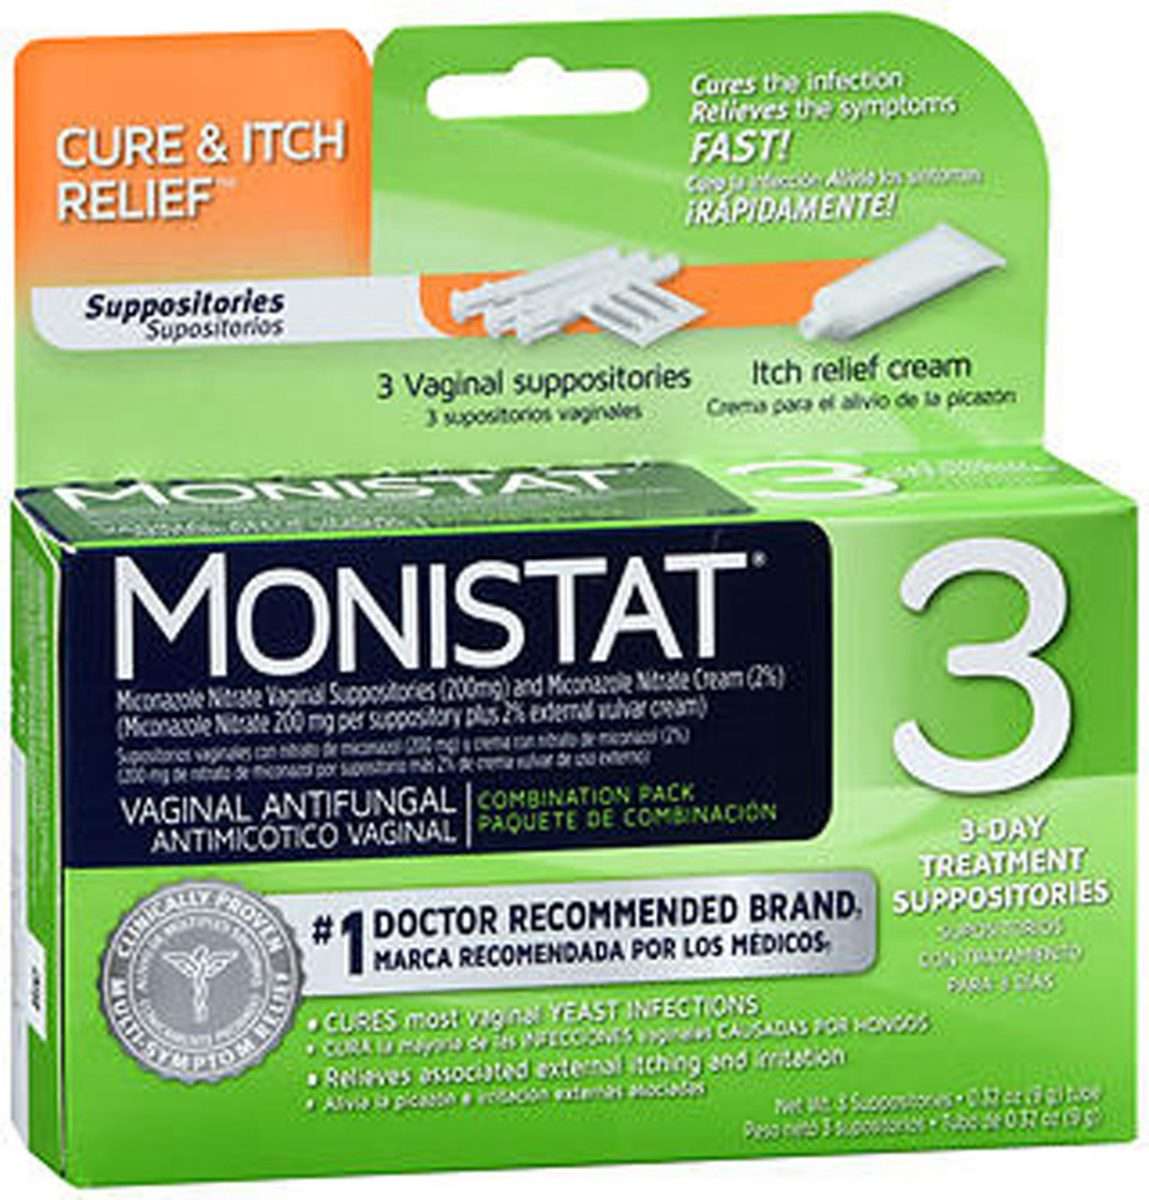 Monistat 3 Vaginal Antifungal Combination Pack Cure &  Itch Relief